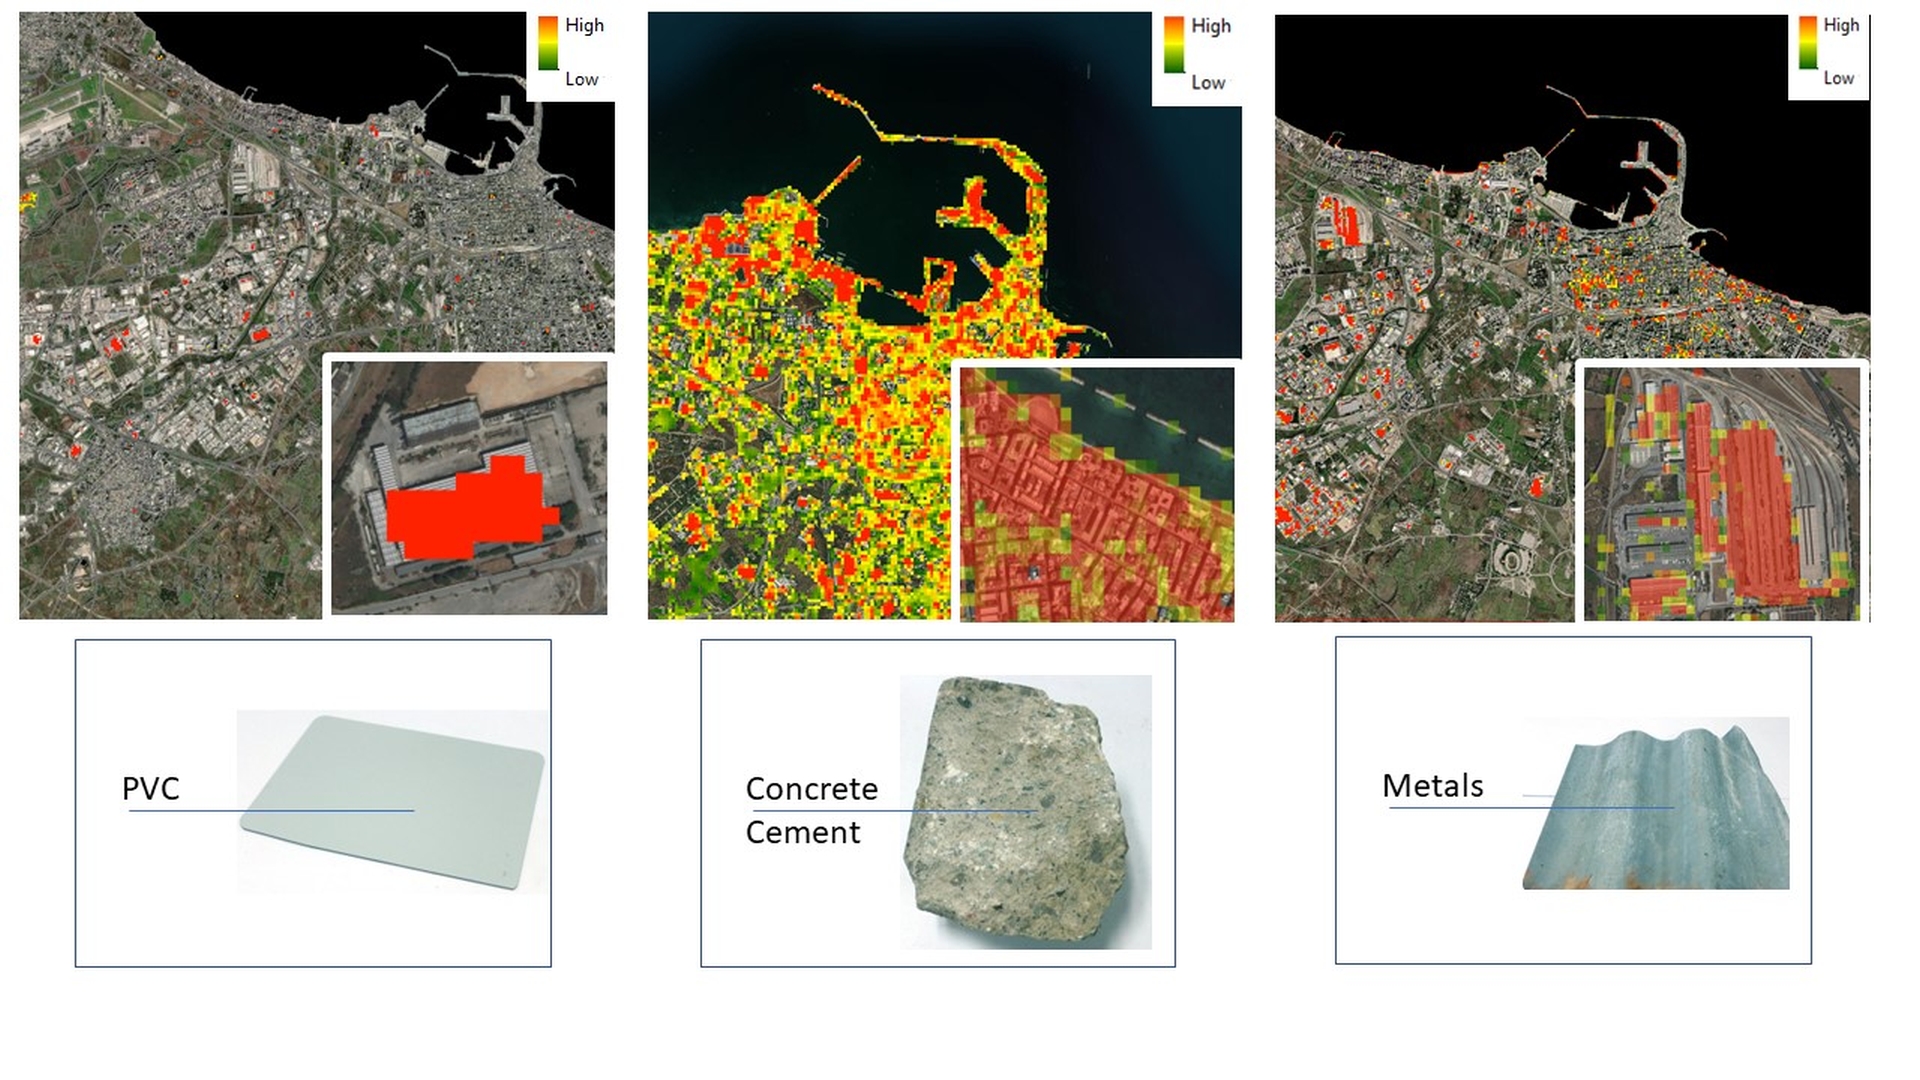 PRISMA for extraction of cover materials in urban areas